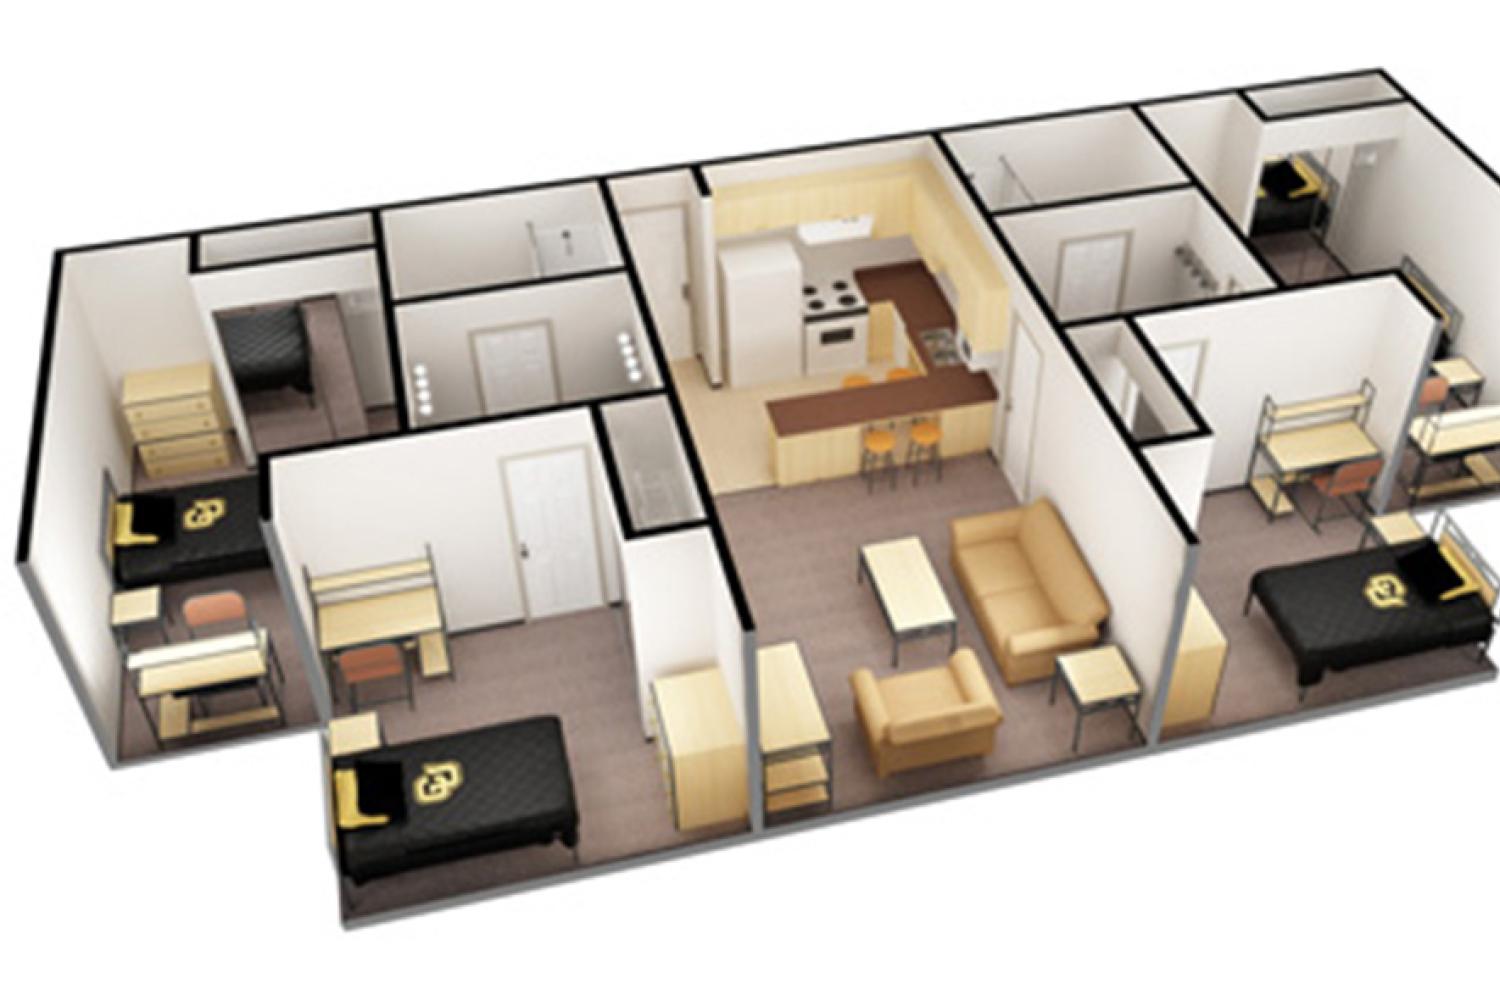 3D apartment layout - 4 single rooms surrounding living room and kitchen, two bathrooms